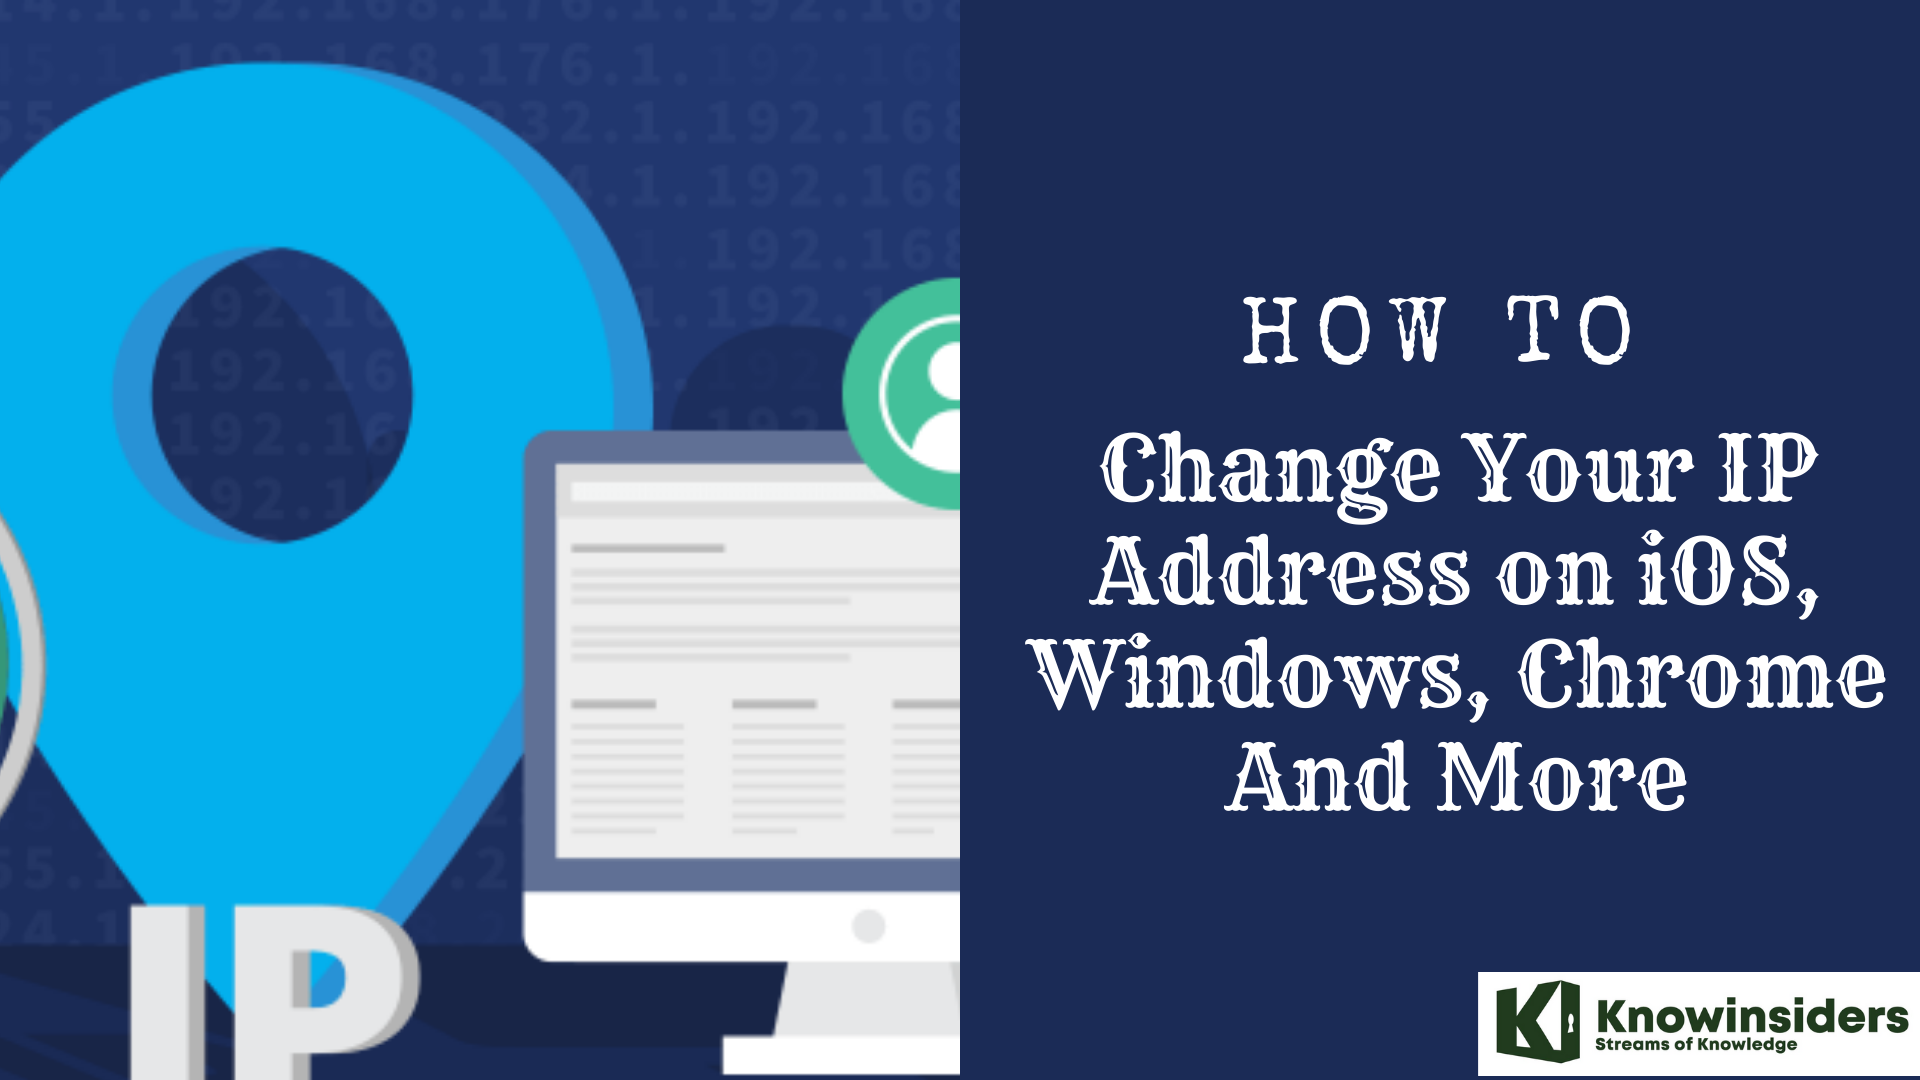 How to Change Your IP Address on iOS, Windows, Chrome and More